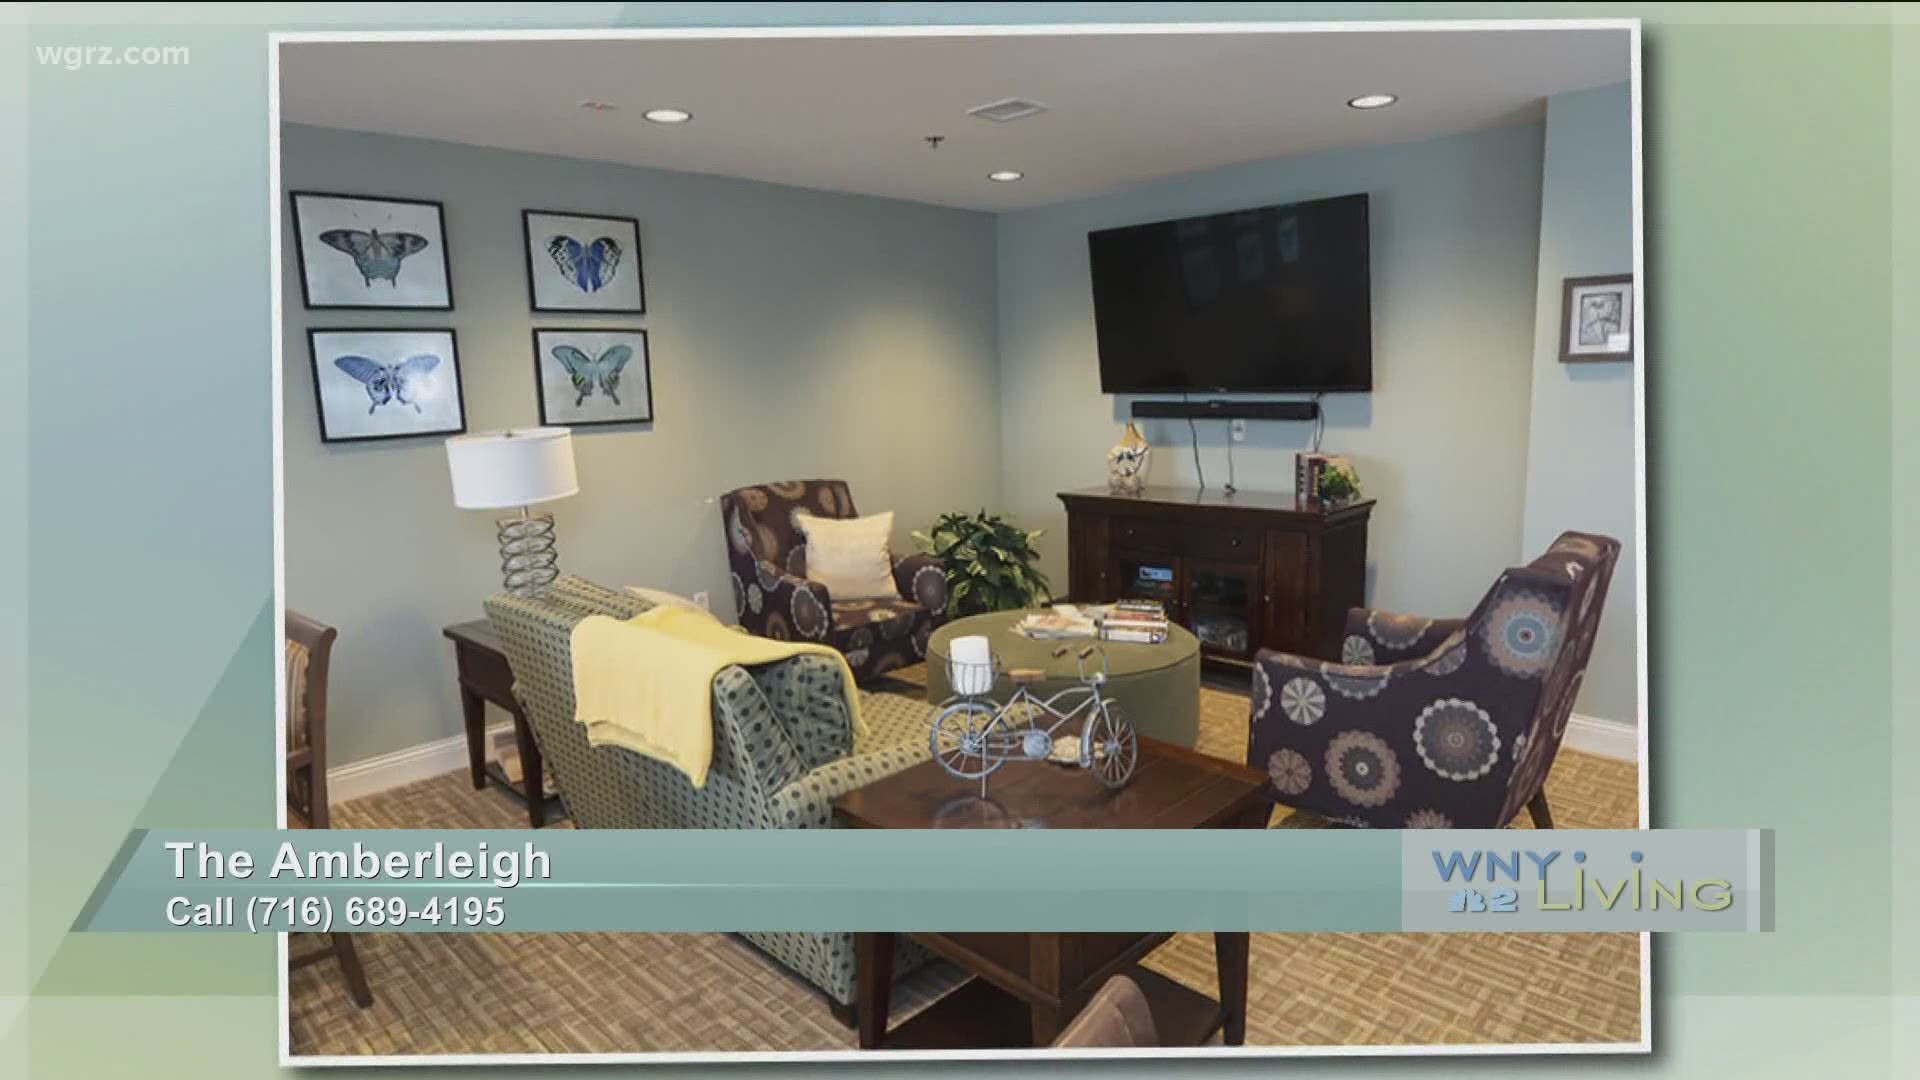 WNY Living - September 26 - The Amberleigh (THIS VIDEO IS SPONSORED BY THE AMBERLEIGH)